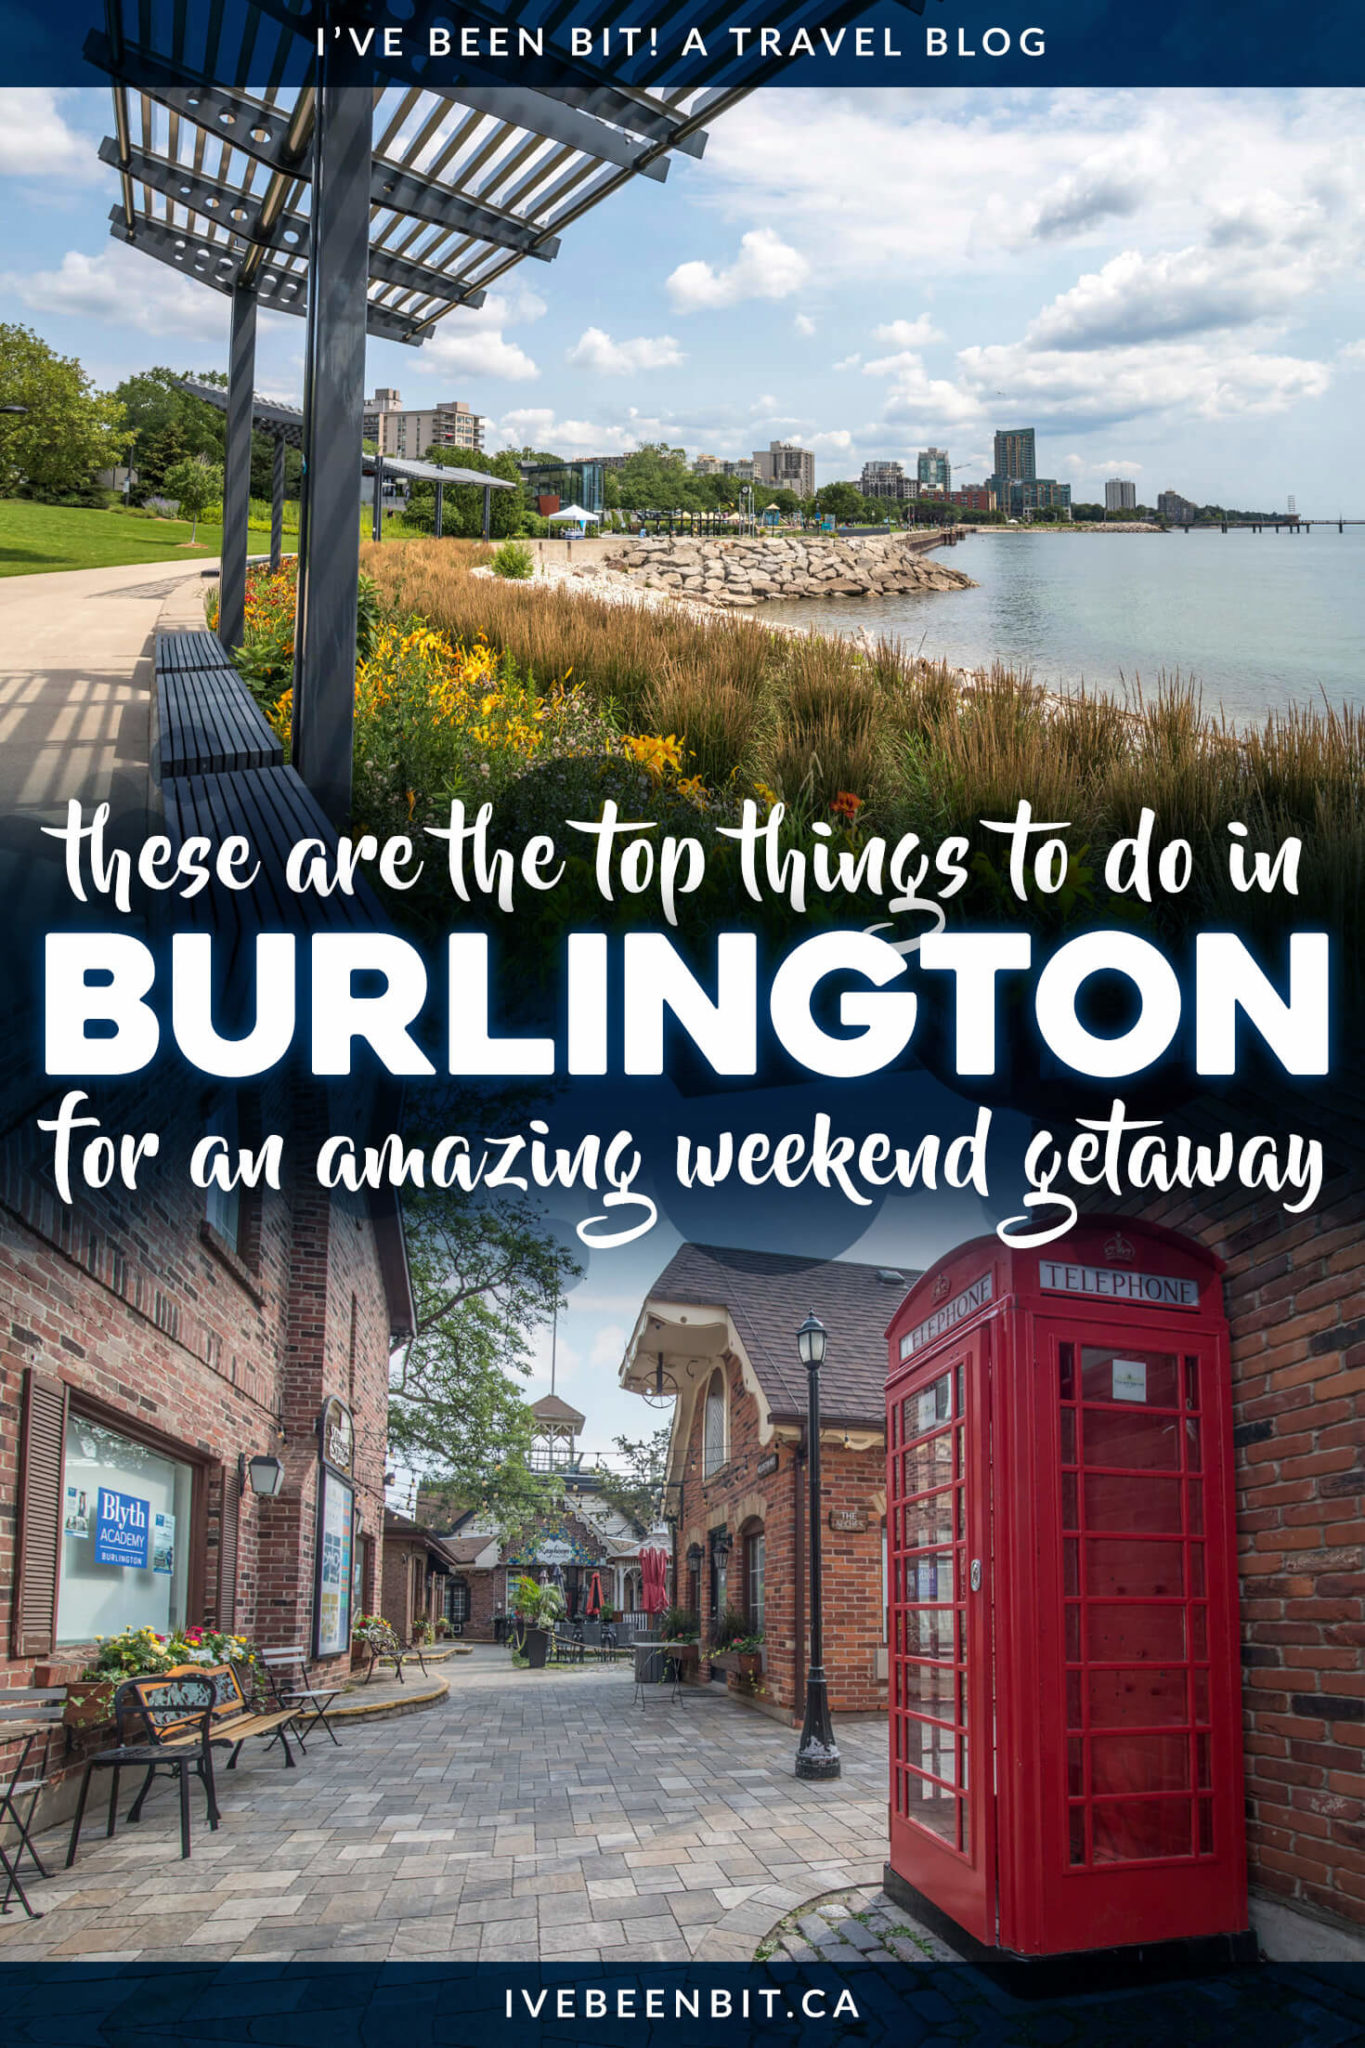 10 Top Things To Do In Burlington For A Stellar Overnight Getaway Ive Been Bit Travel Blog 4605